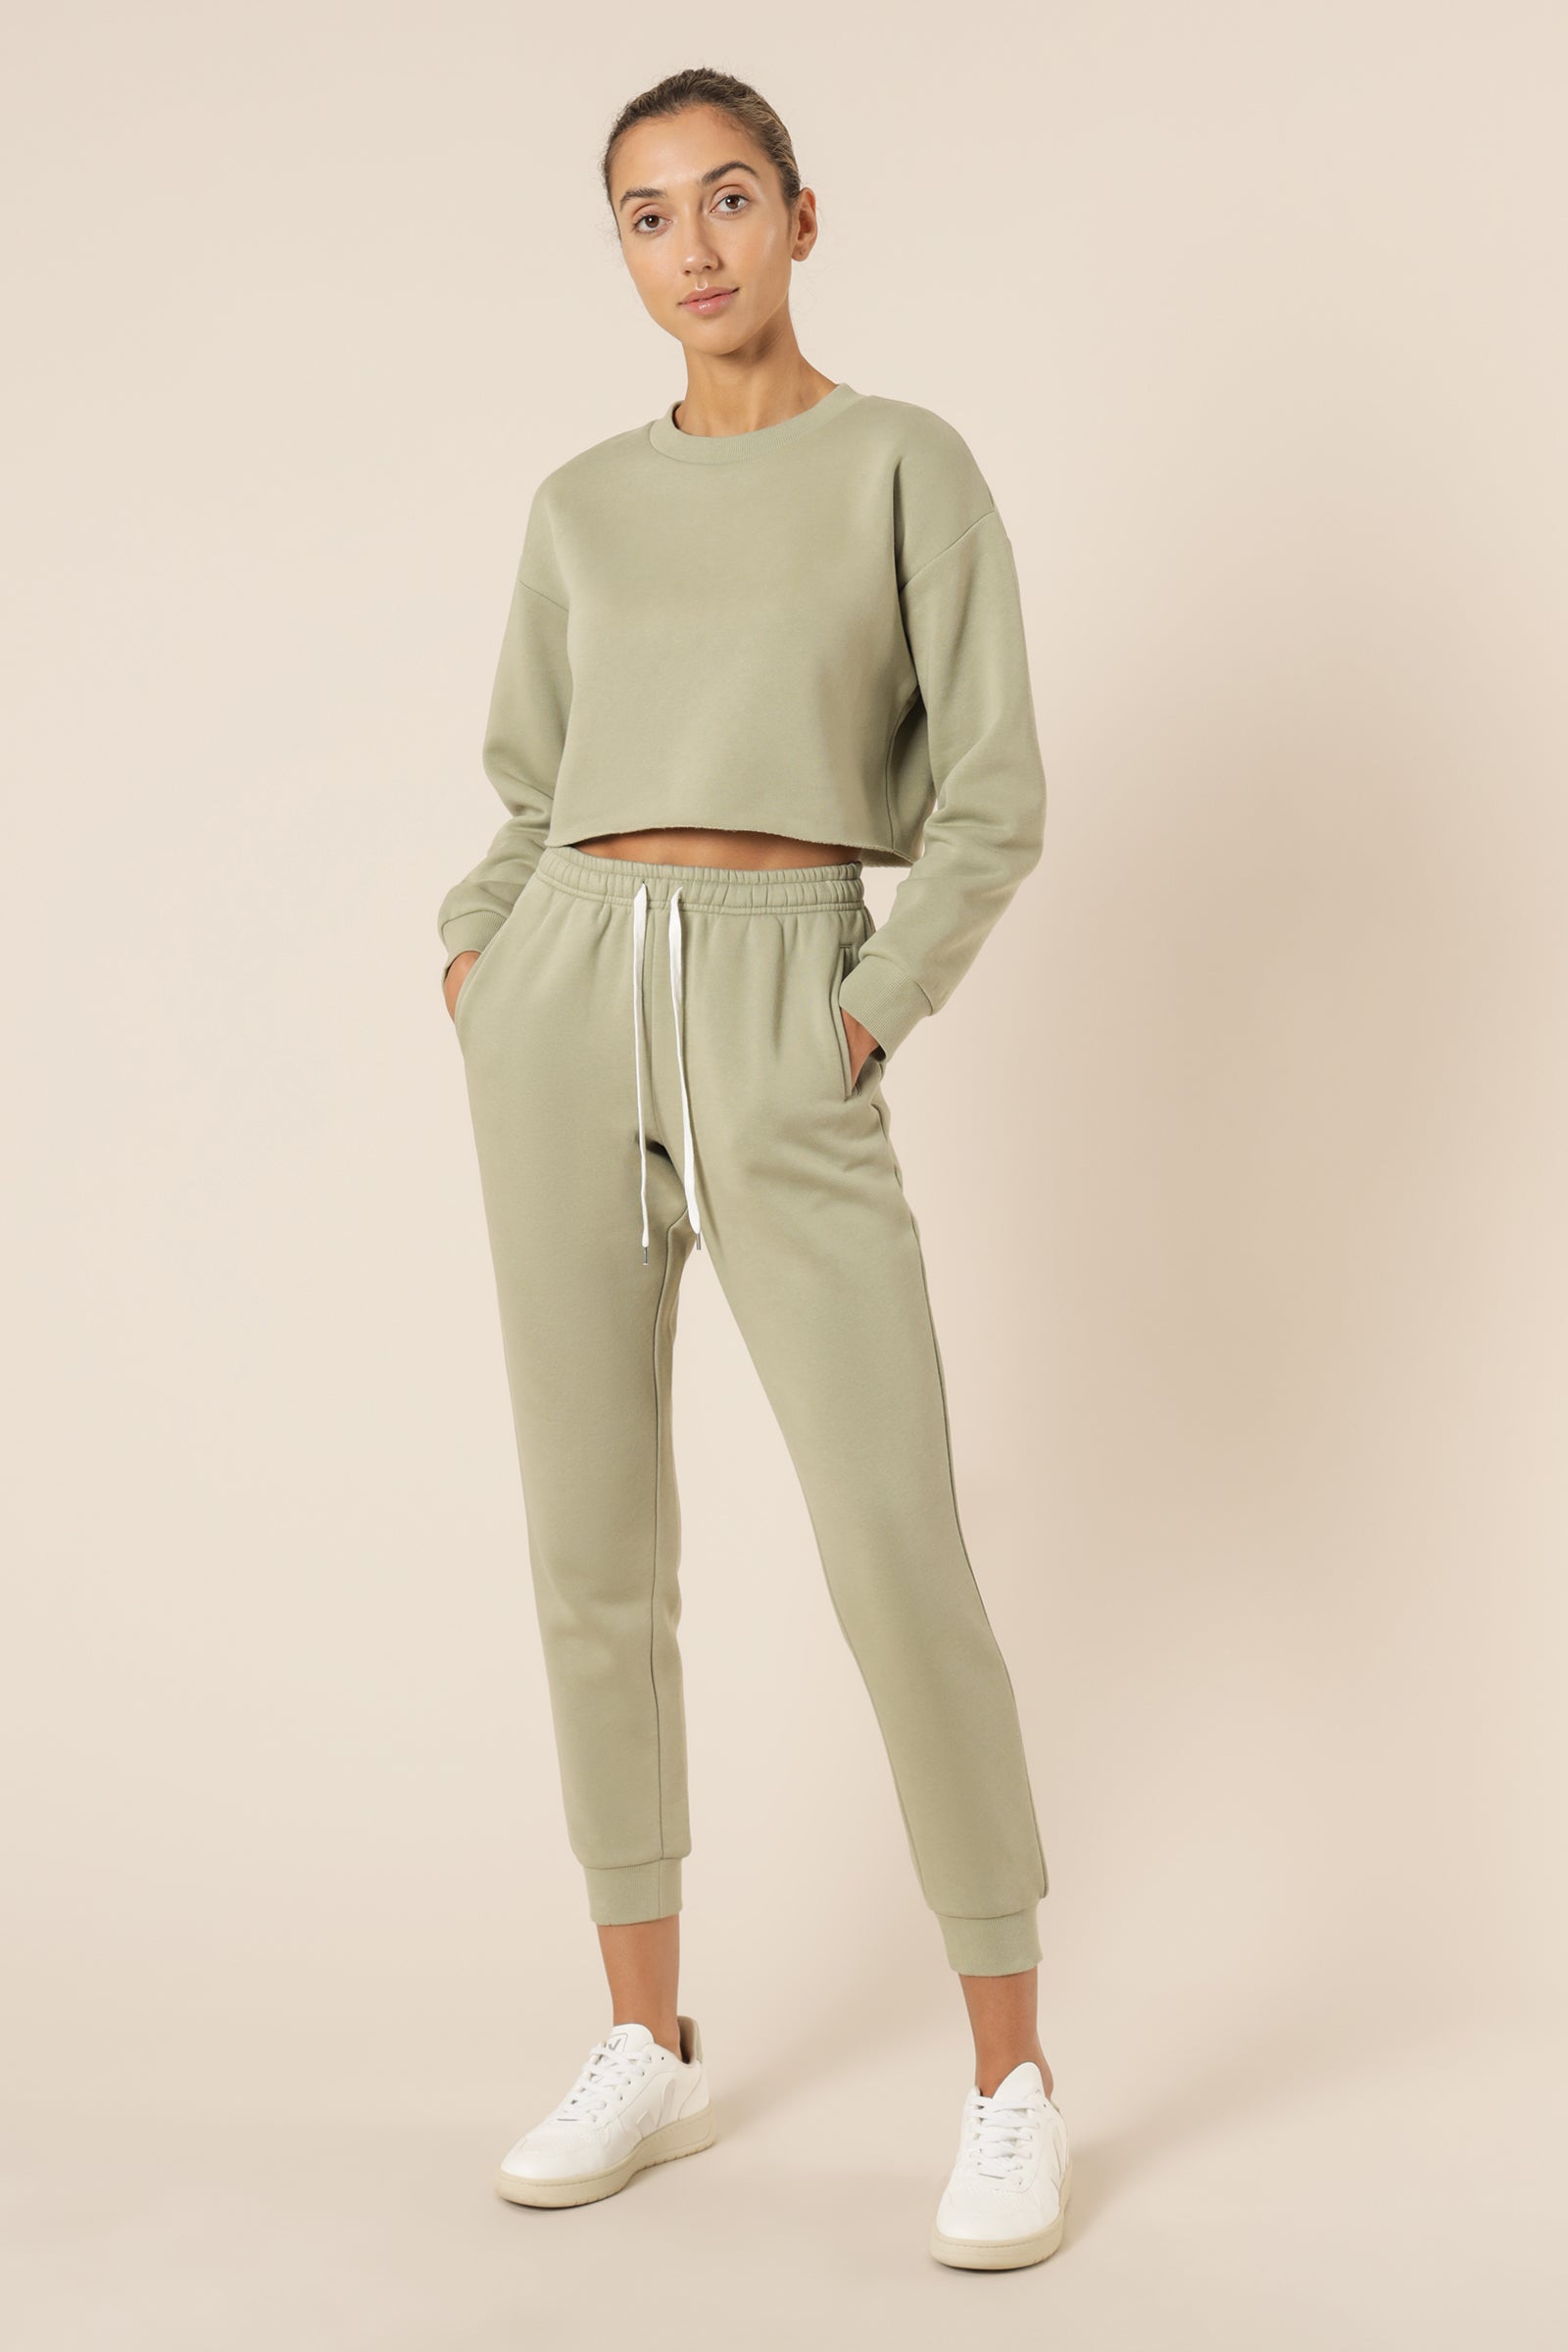 Nude Lucy Carter Classic Trackpant Washed Sage Pants 